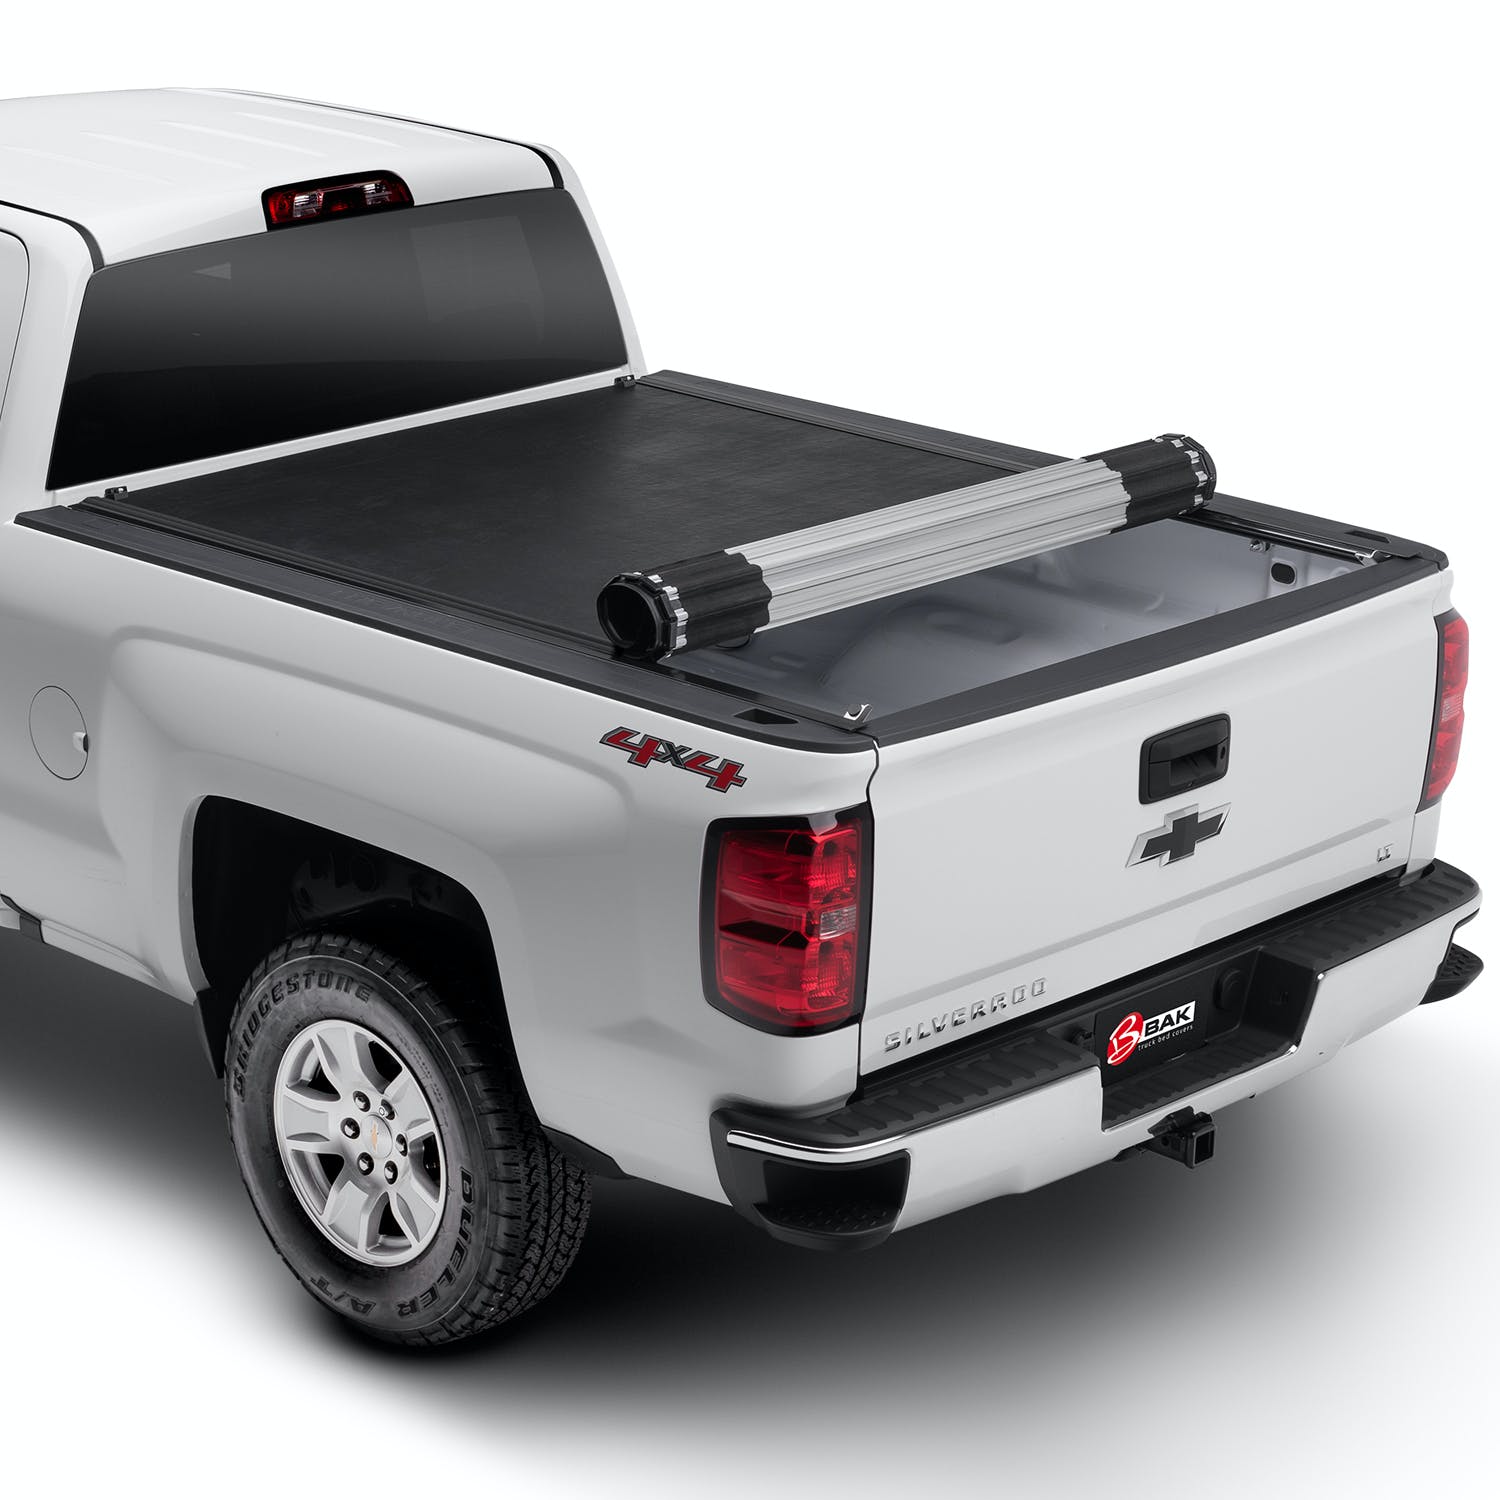 BAK Industries 39525 Revolver X2 Hard Rolling Truck Bed Cover